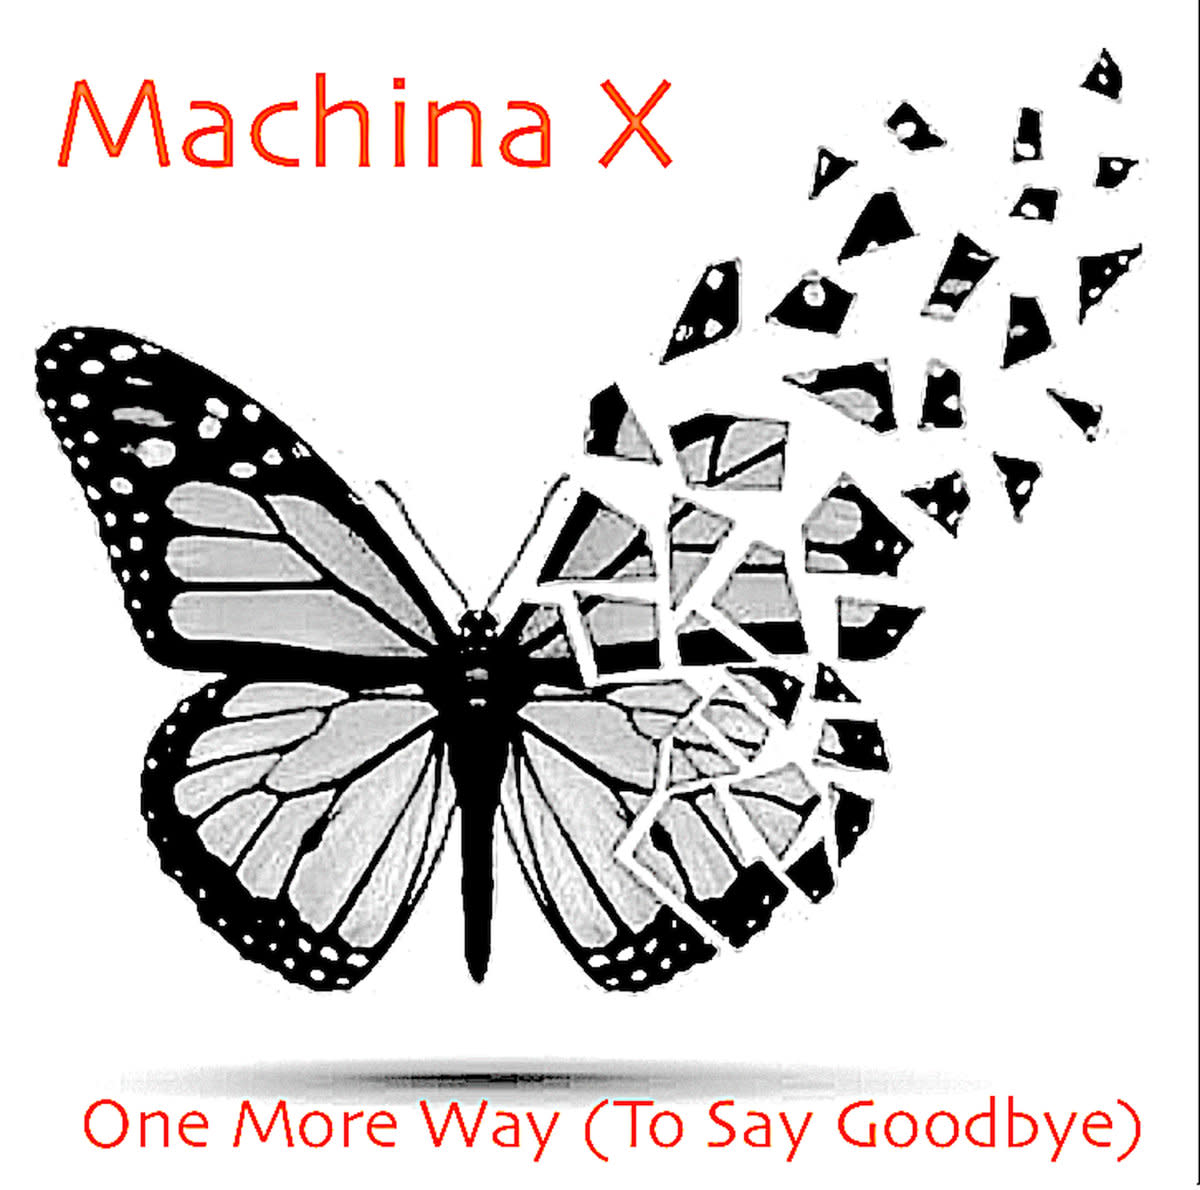 synth-single-review-one-more-way-to-say-goodbye-by-machina-x